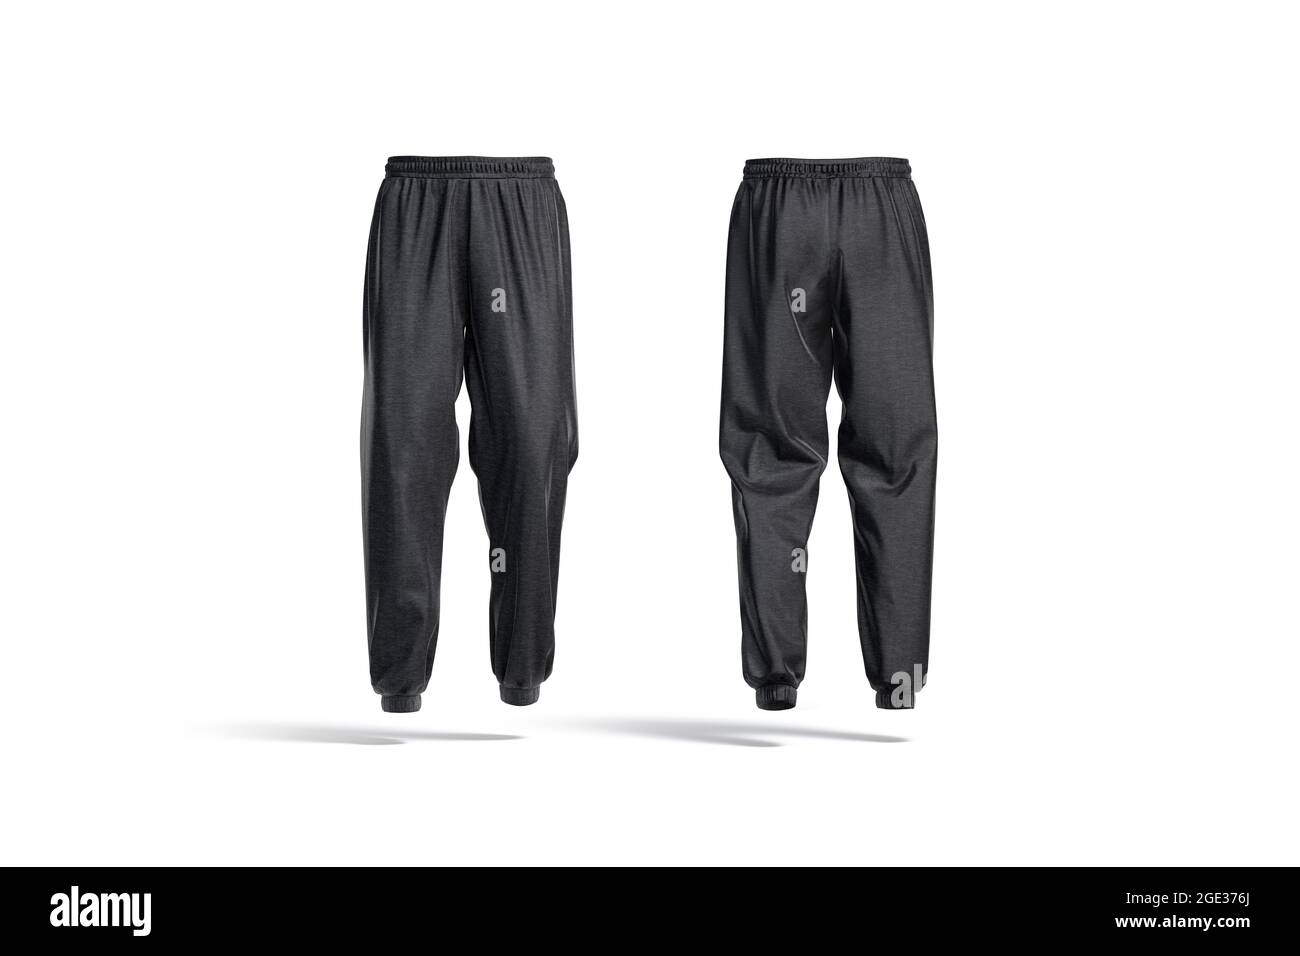 https://c8.alamy.com/comp/2GE376J/blank-black-sport-sweatpants-mockup-front-and-back-view-3d-rendering-empty-comfort-pants-or-slacks-for-outfit-mock-up-isolated-clear-sporty-pajam-2GE376J.jpg